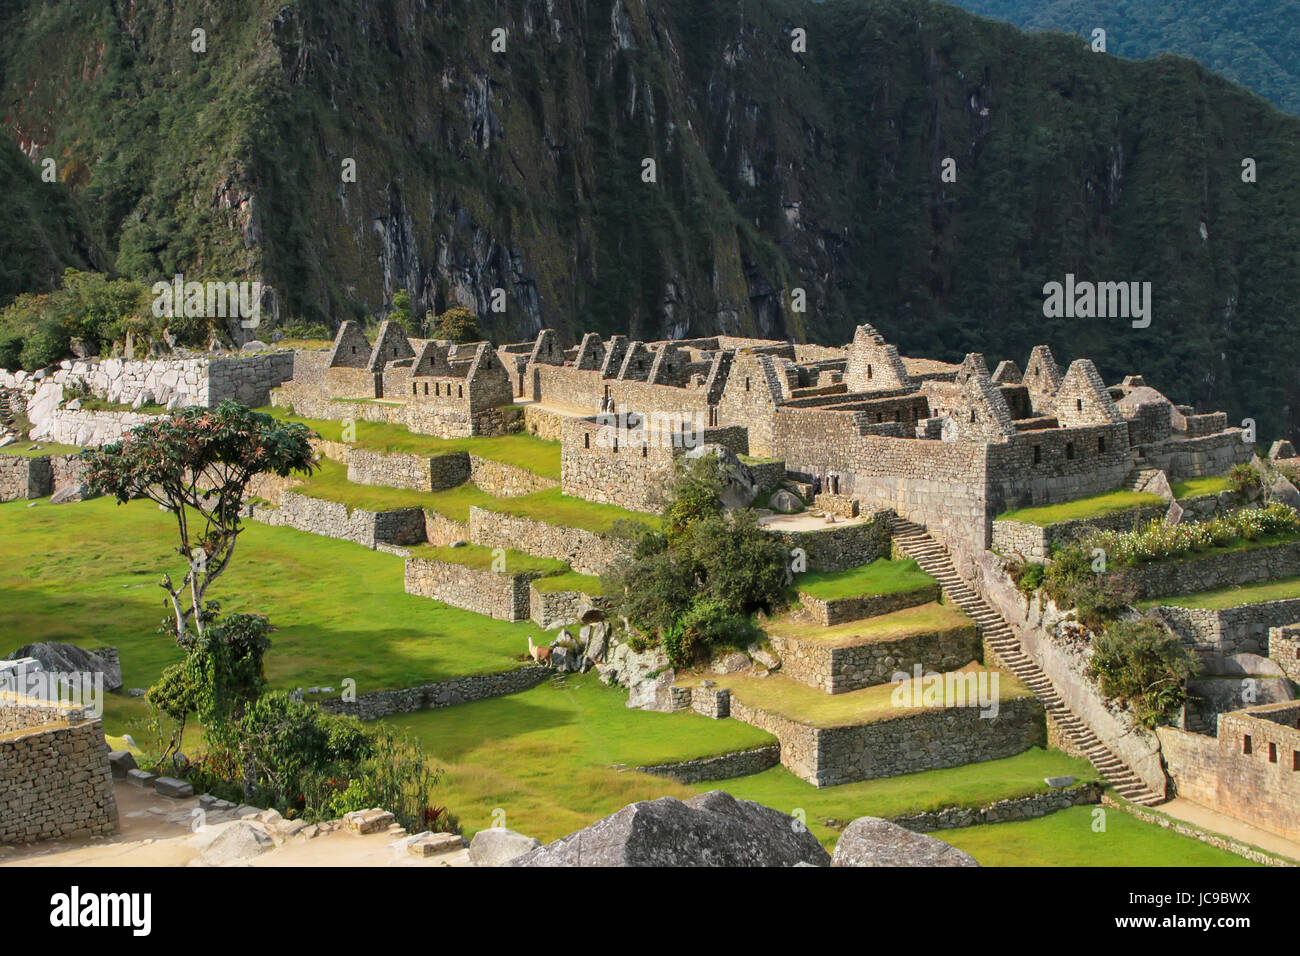 Inca citadel Machu Picchu in Peru. In 2007 Machu Picchu was voted one of the New Seven Wonders of the World. Stock Photo